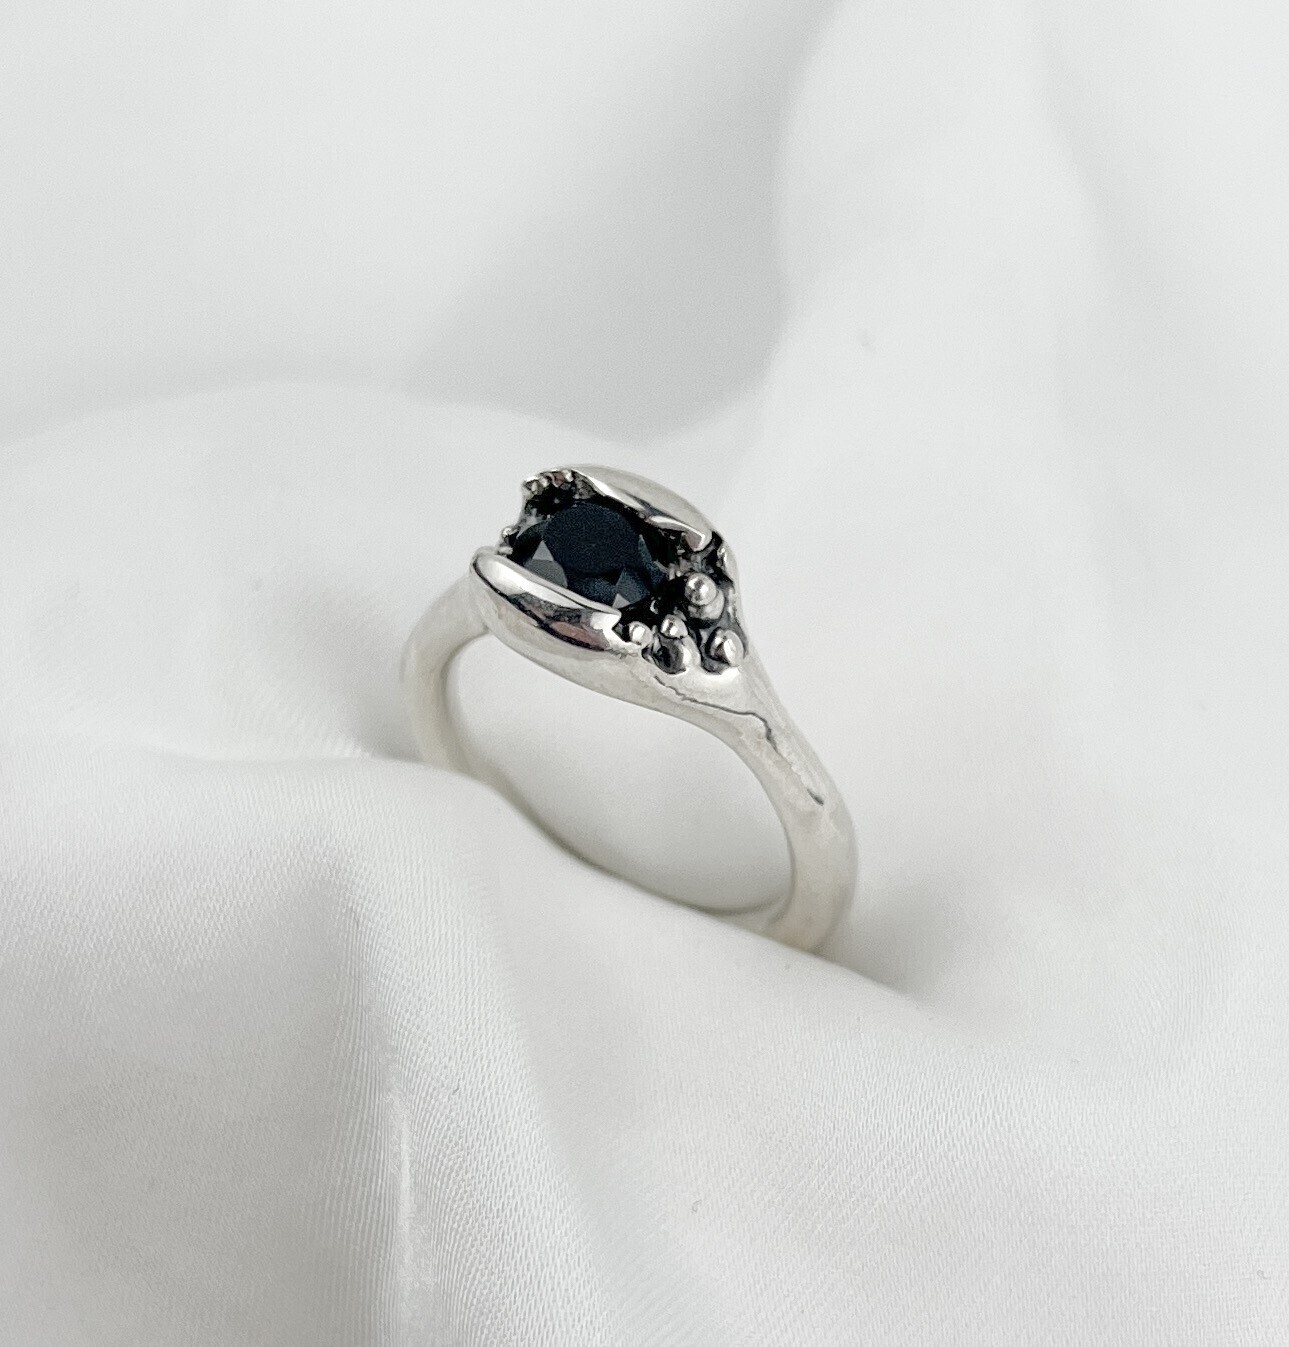 ARTIFACT- Black Onyx Ring Sterling Silver Size 5.5